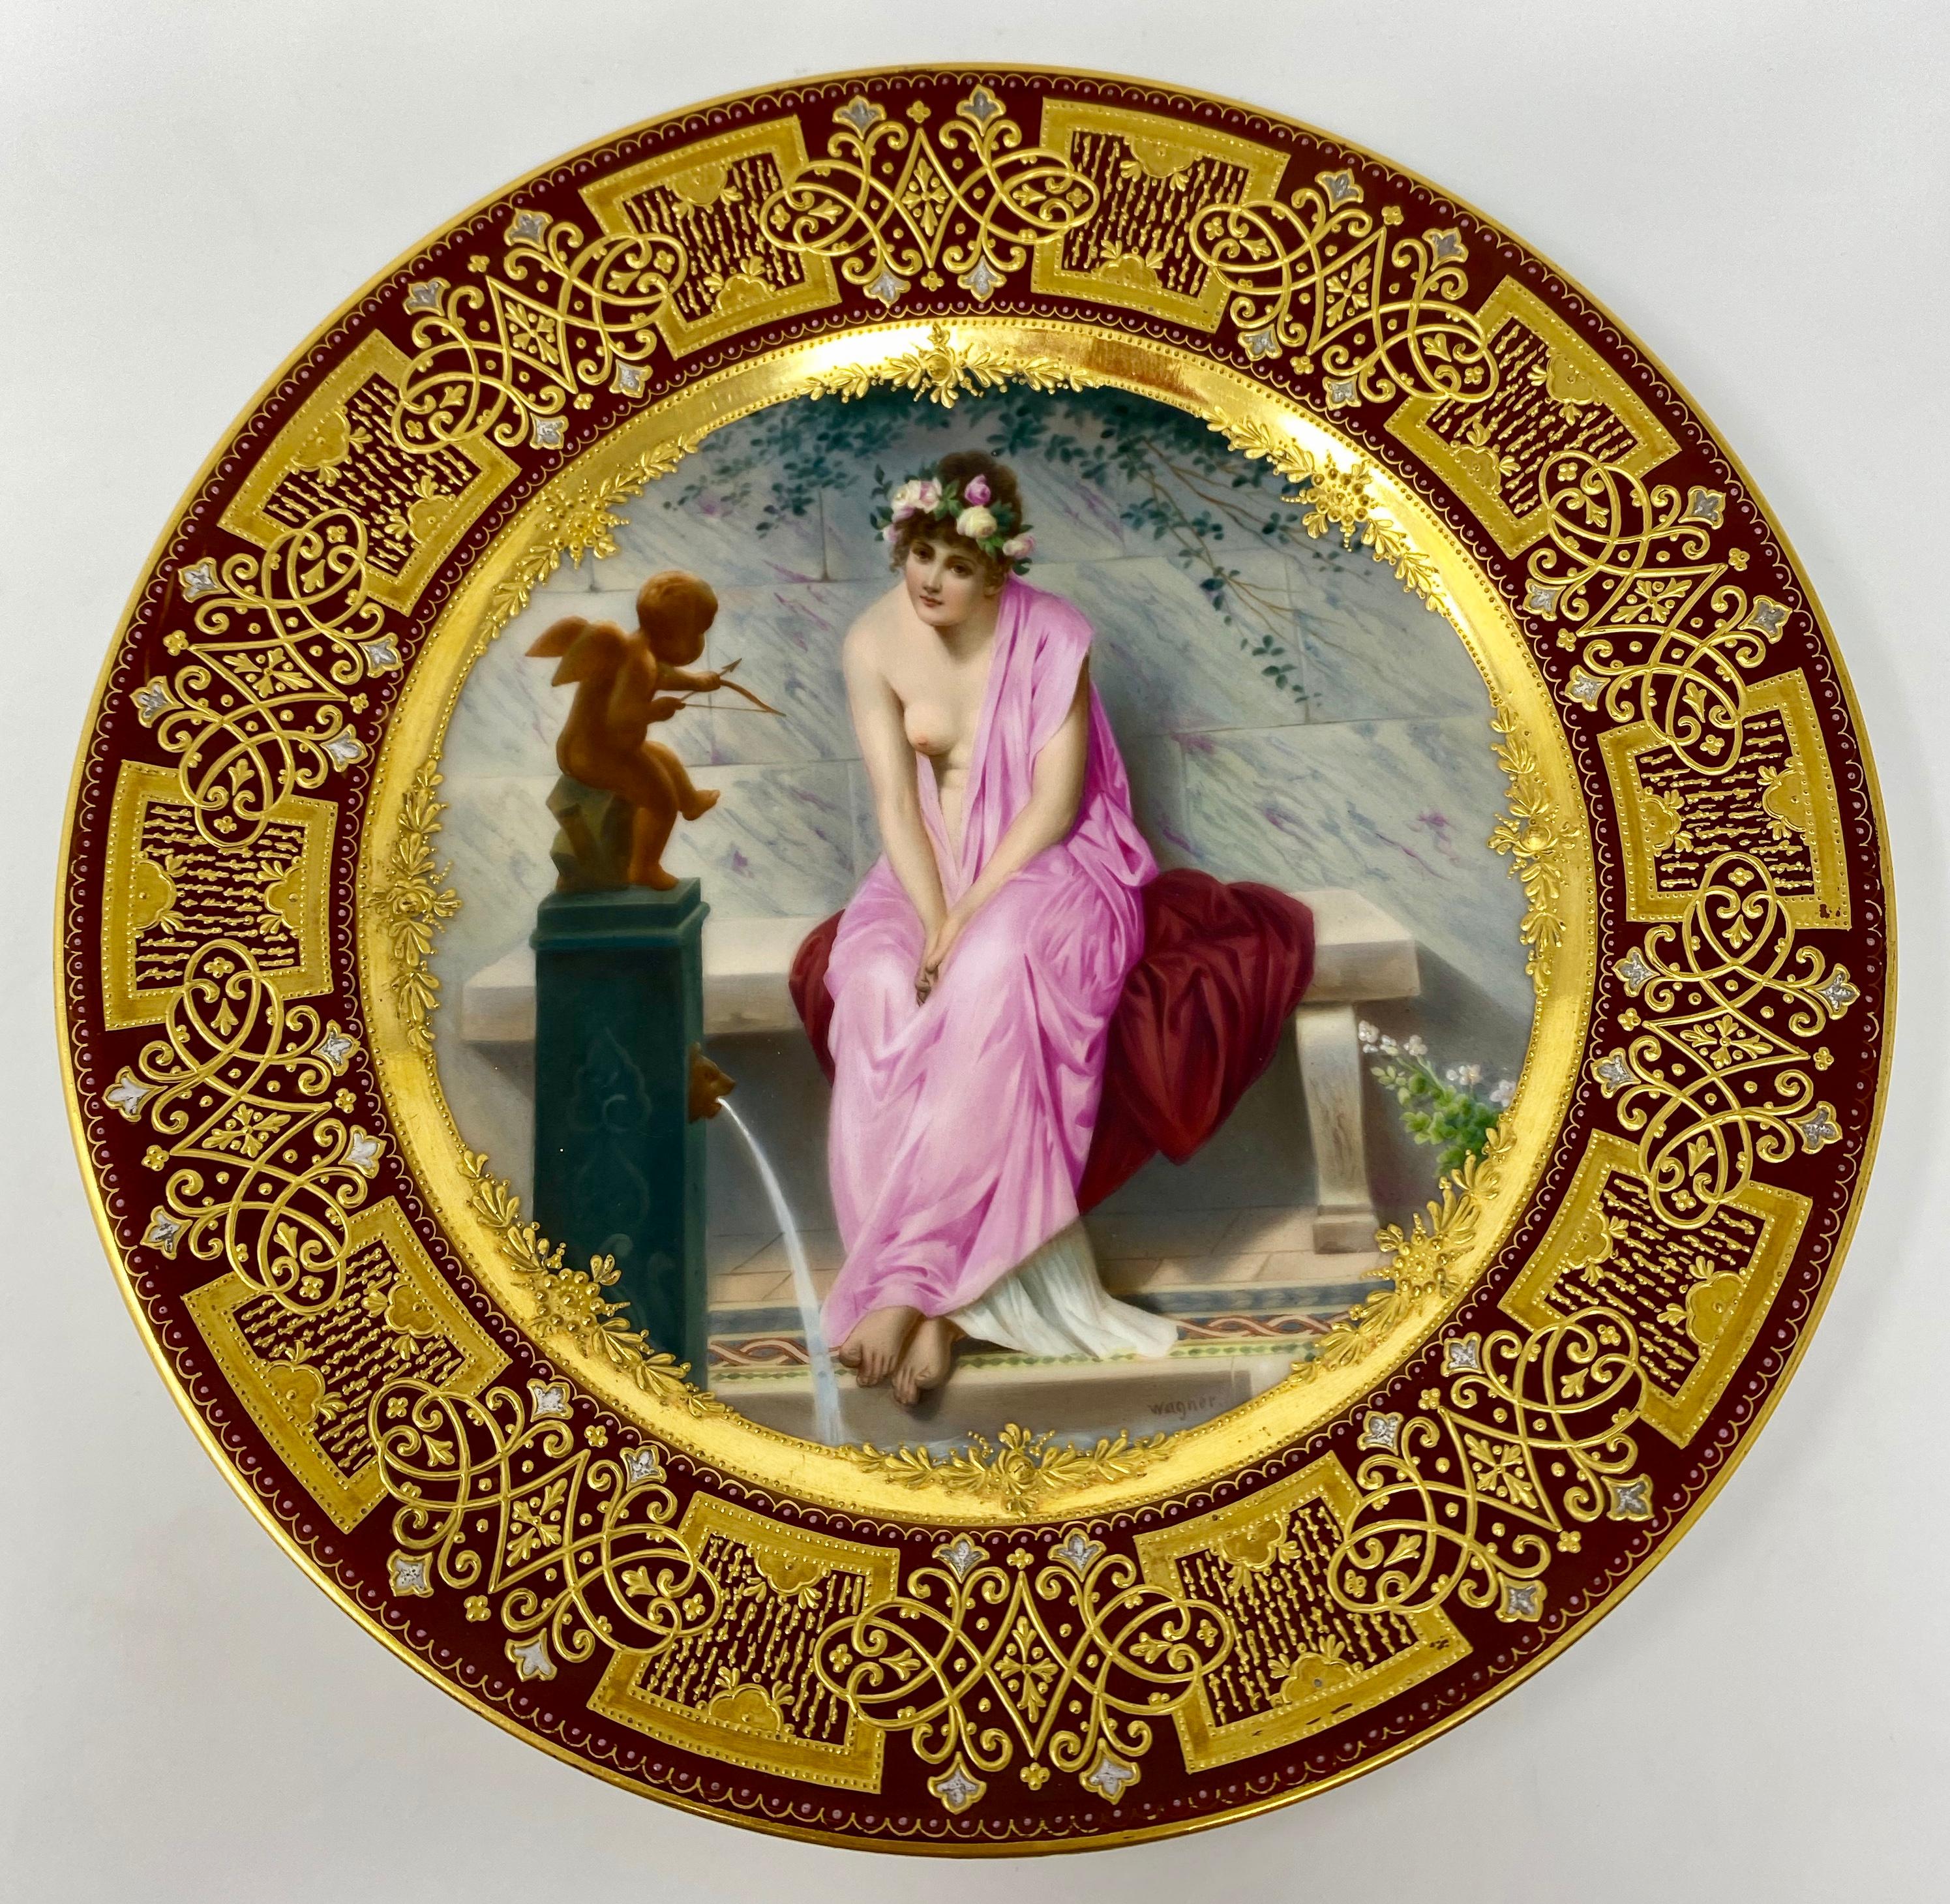 This is a beautiful plate, executed to museum quality standards. 
